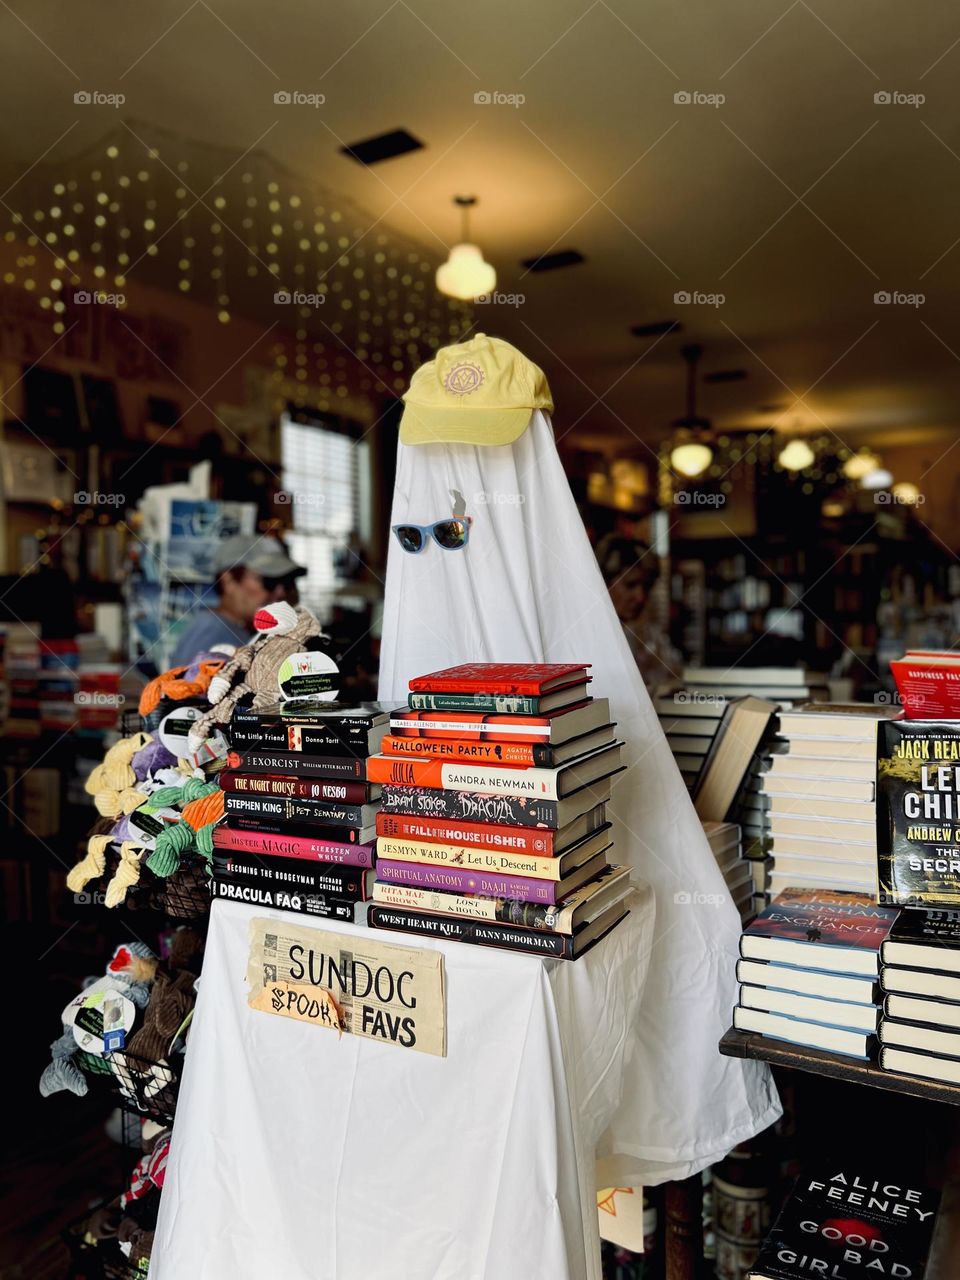 Halloween decorations in a bookstore. Ghost wearing sunglasses and a cap, holding spooky books